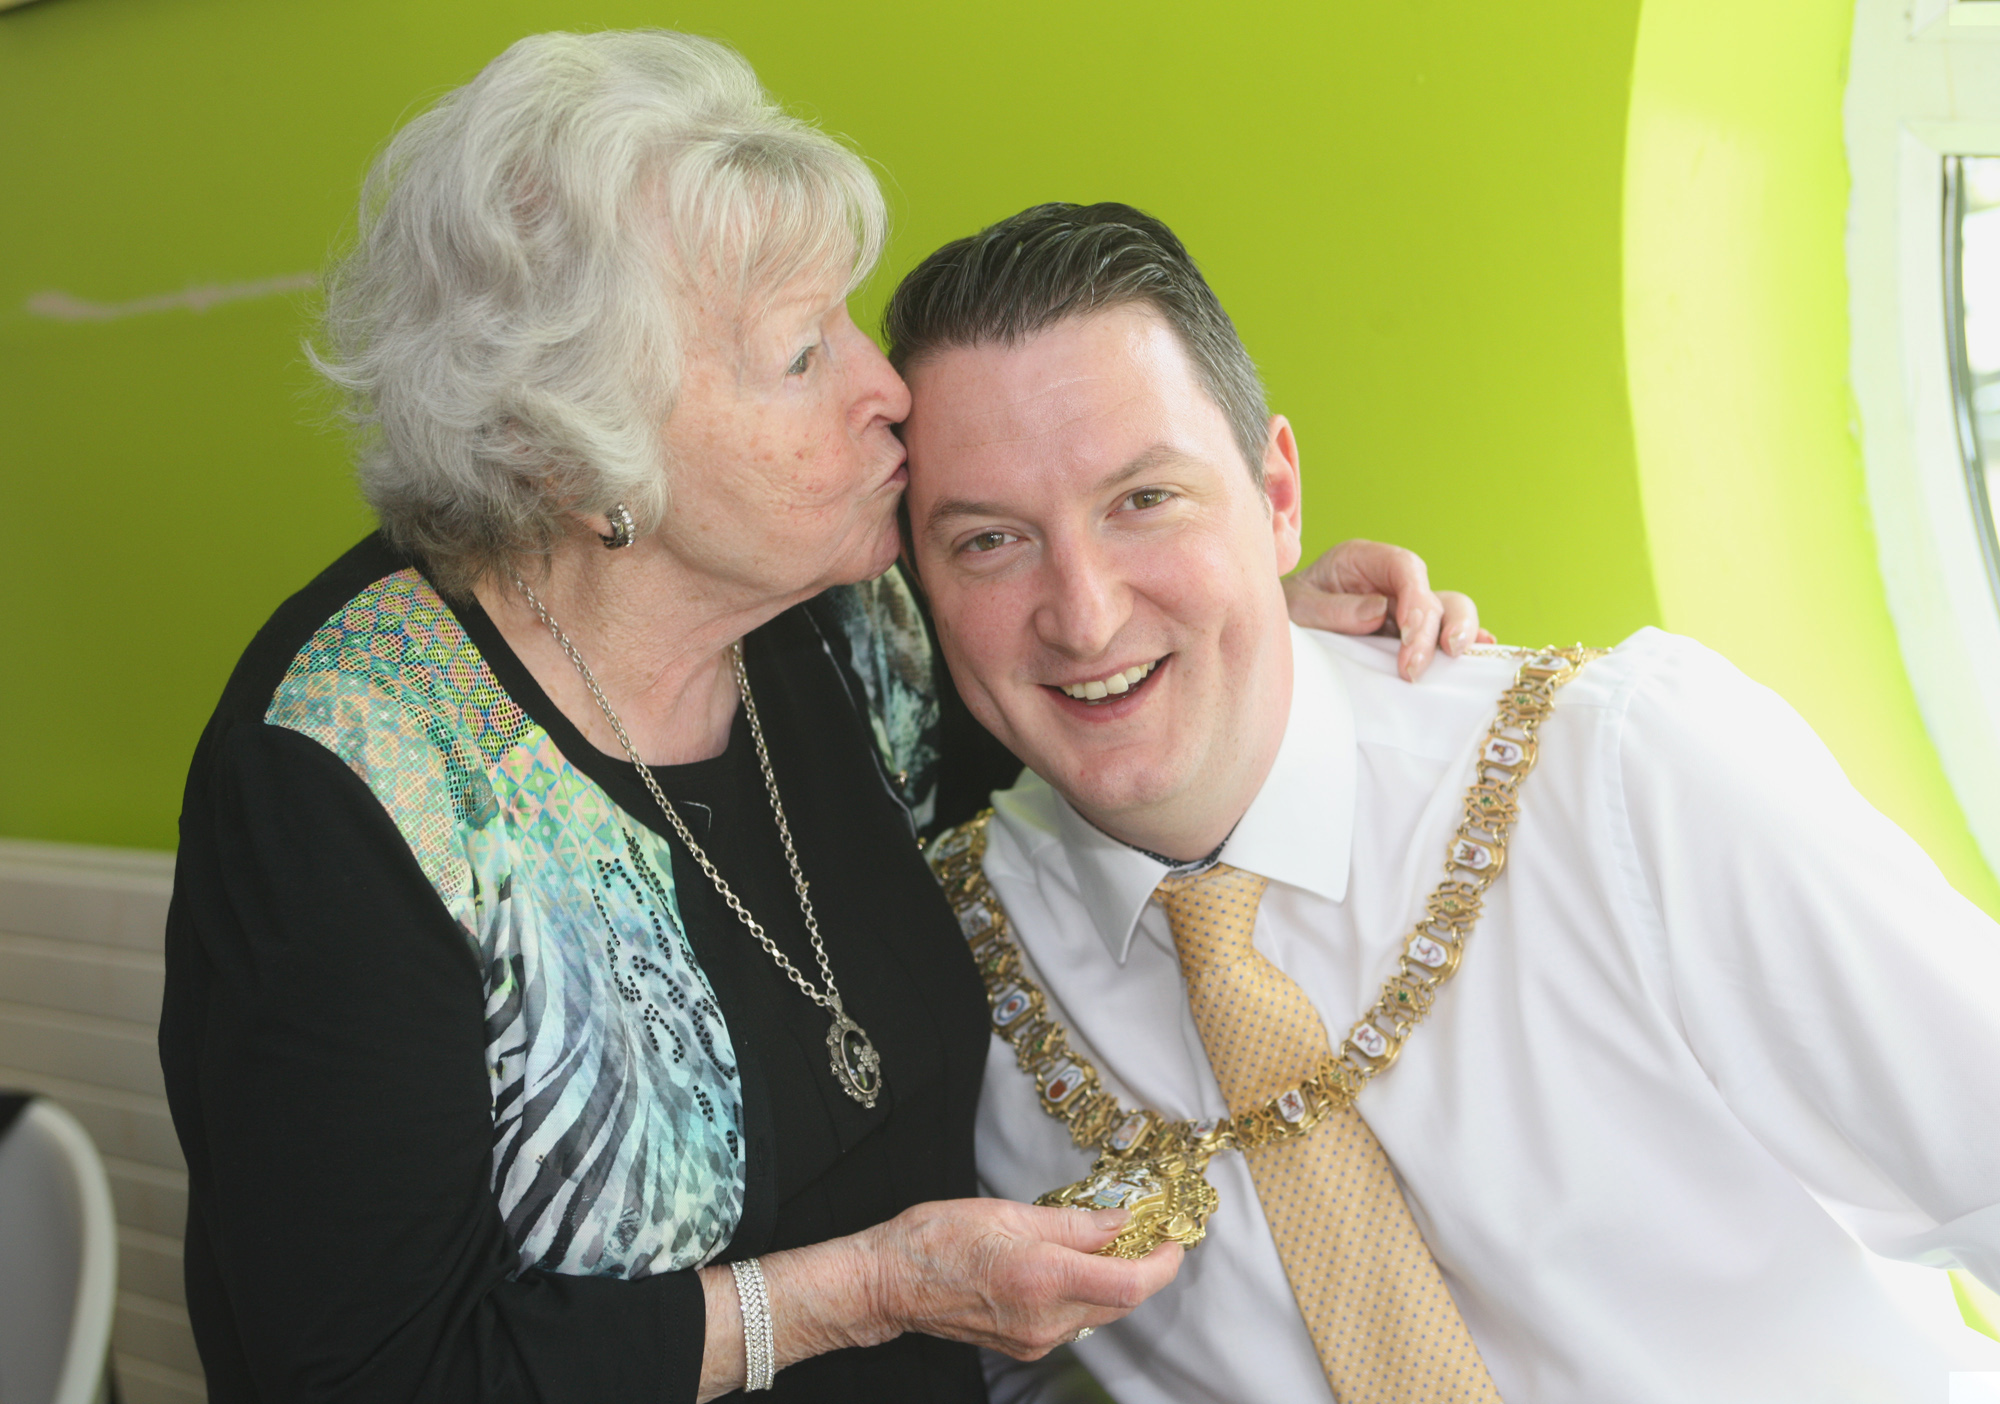 Geraldine Brannigan with Lord Mayor john Finucane at the Tullymore Community Centre. The Lord Mayor was visiting as part of a celebration of older people\'s programmes